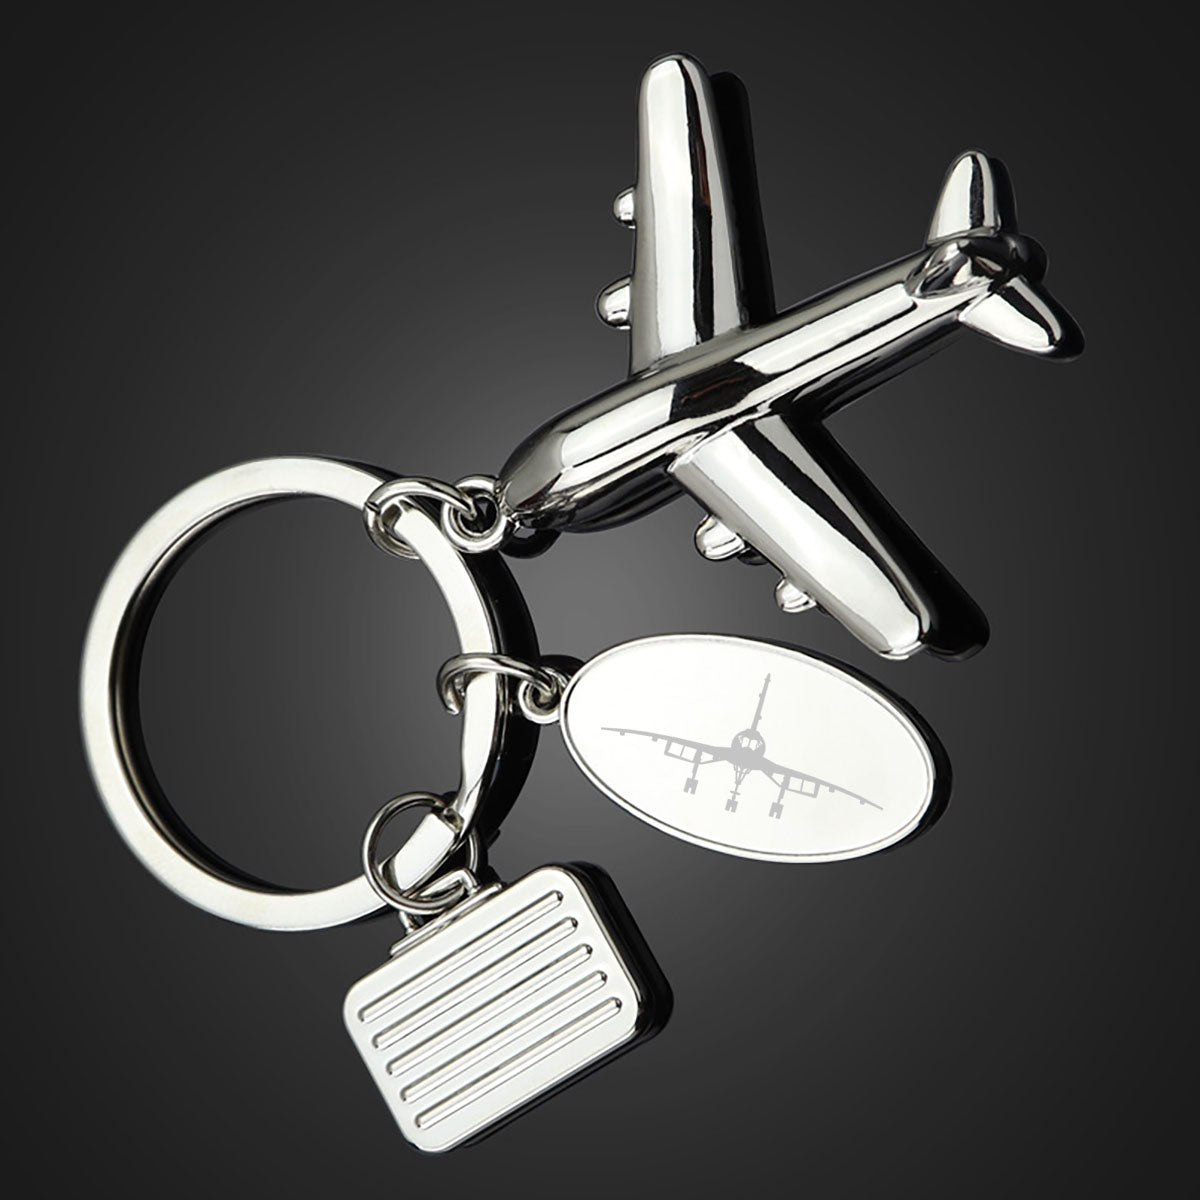 Concorde Silhouette Designed Suitcase Airplane Key Chains